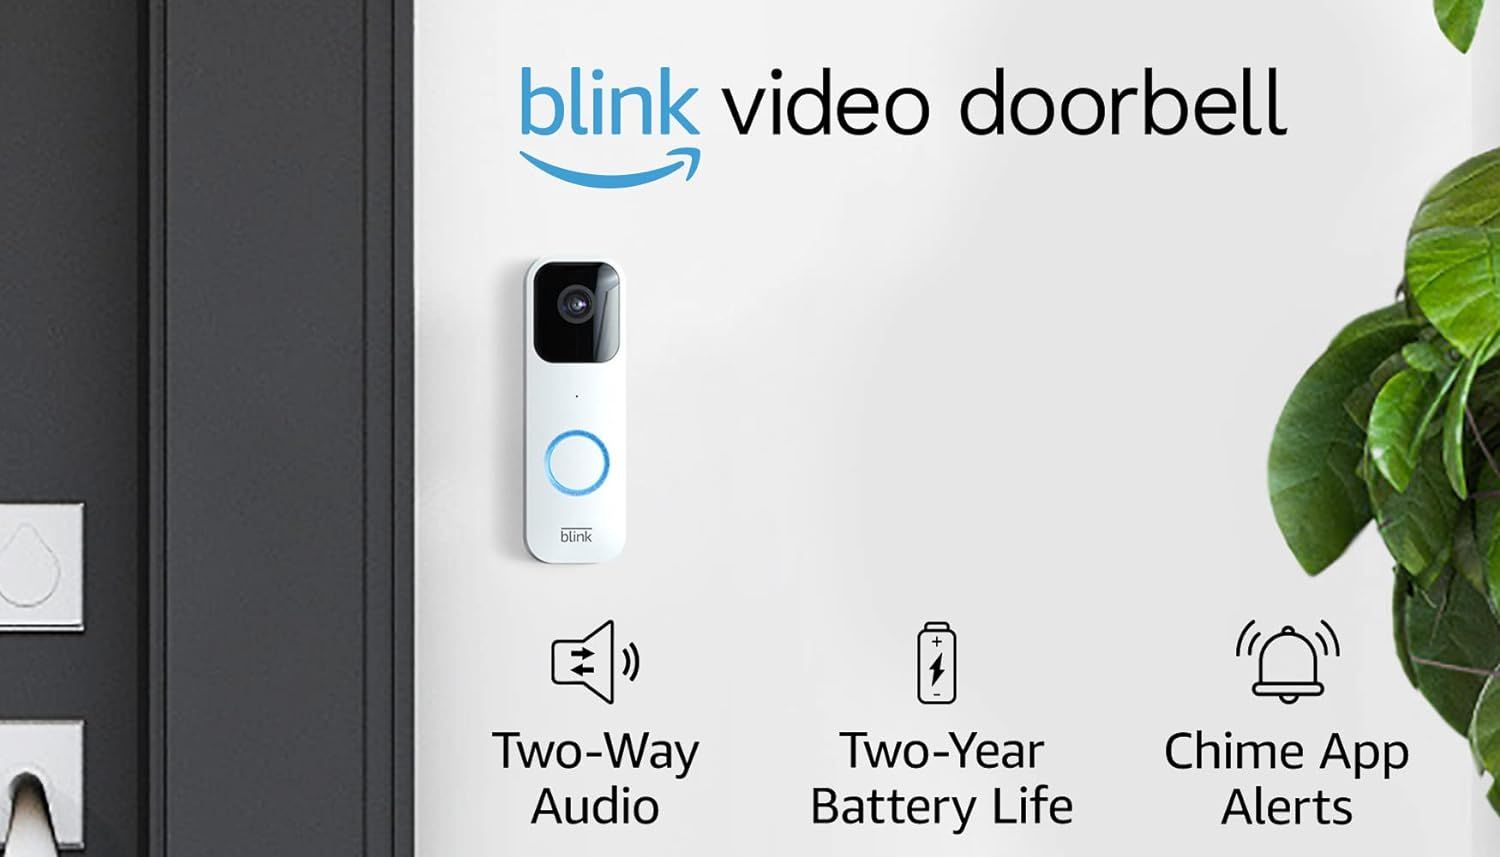 Blink Video Doorbell + 3 Outdoor camera system with Sync Module 2 | Two-way audio, HD video, moti... | Amazon (US)